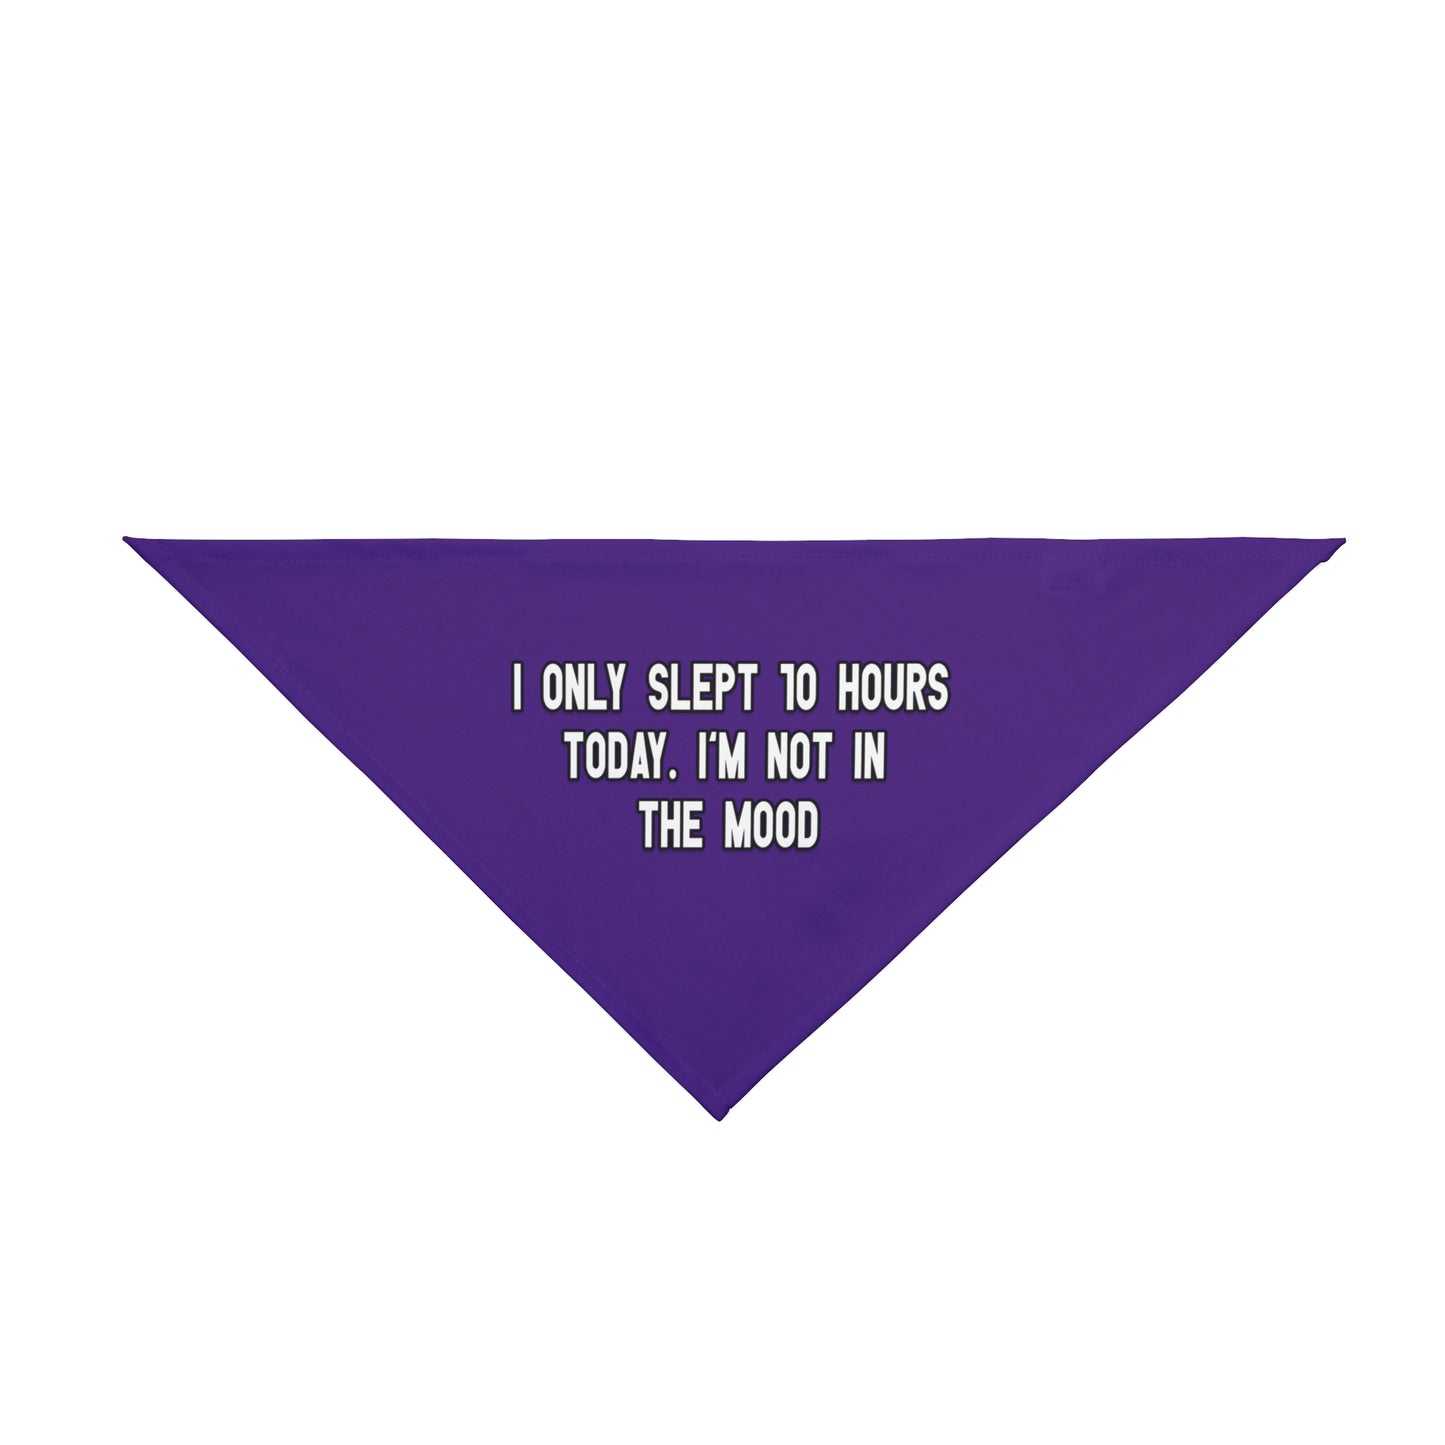 A bandana with the message: I ONLY SLEPT 10 HOURS TODAY. I'M NOT IN THE MOOD . Bandana's Color is purple